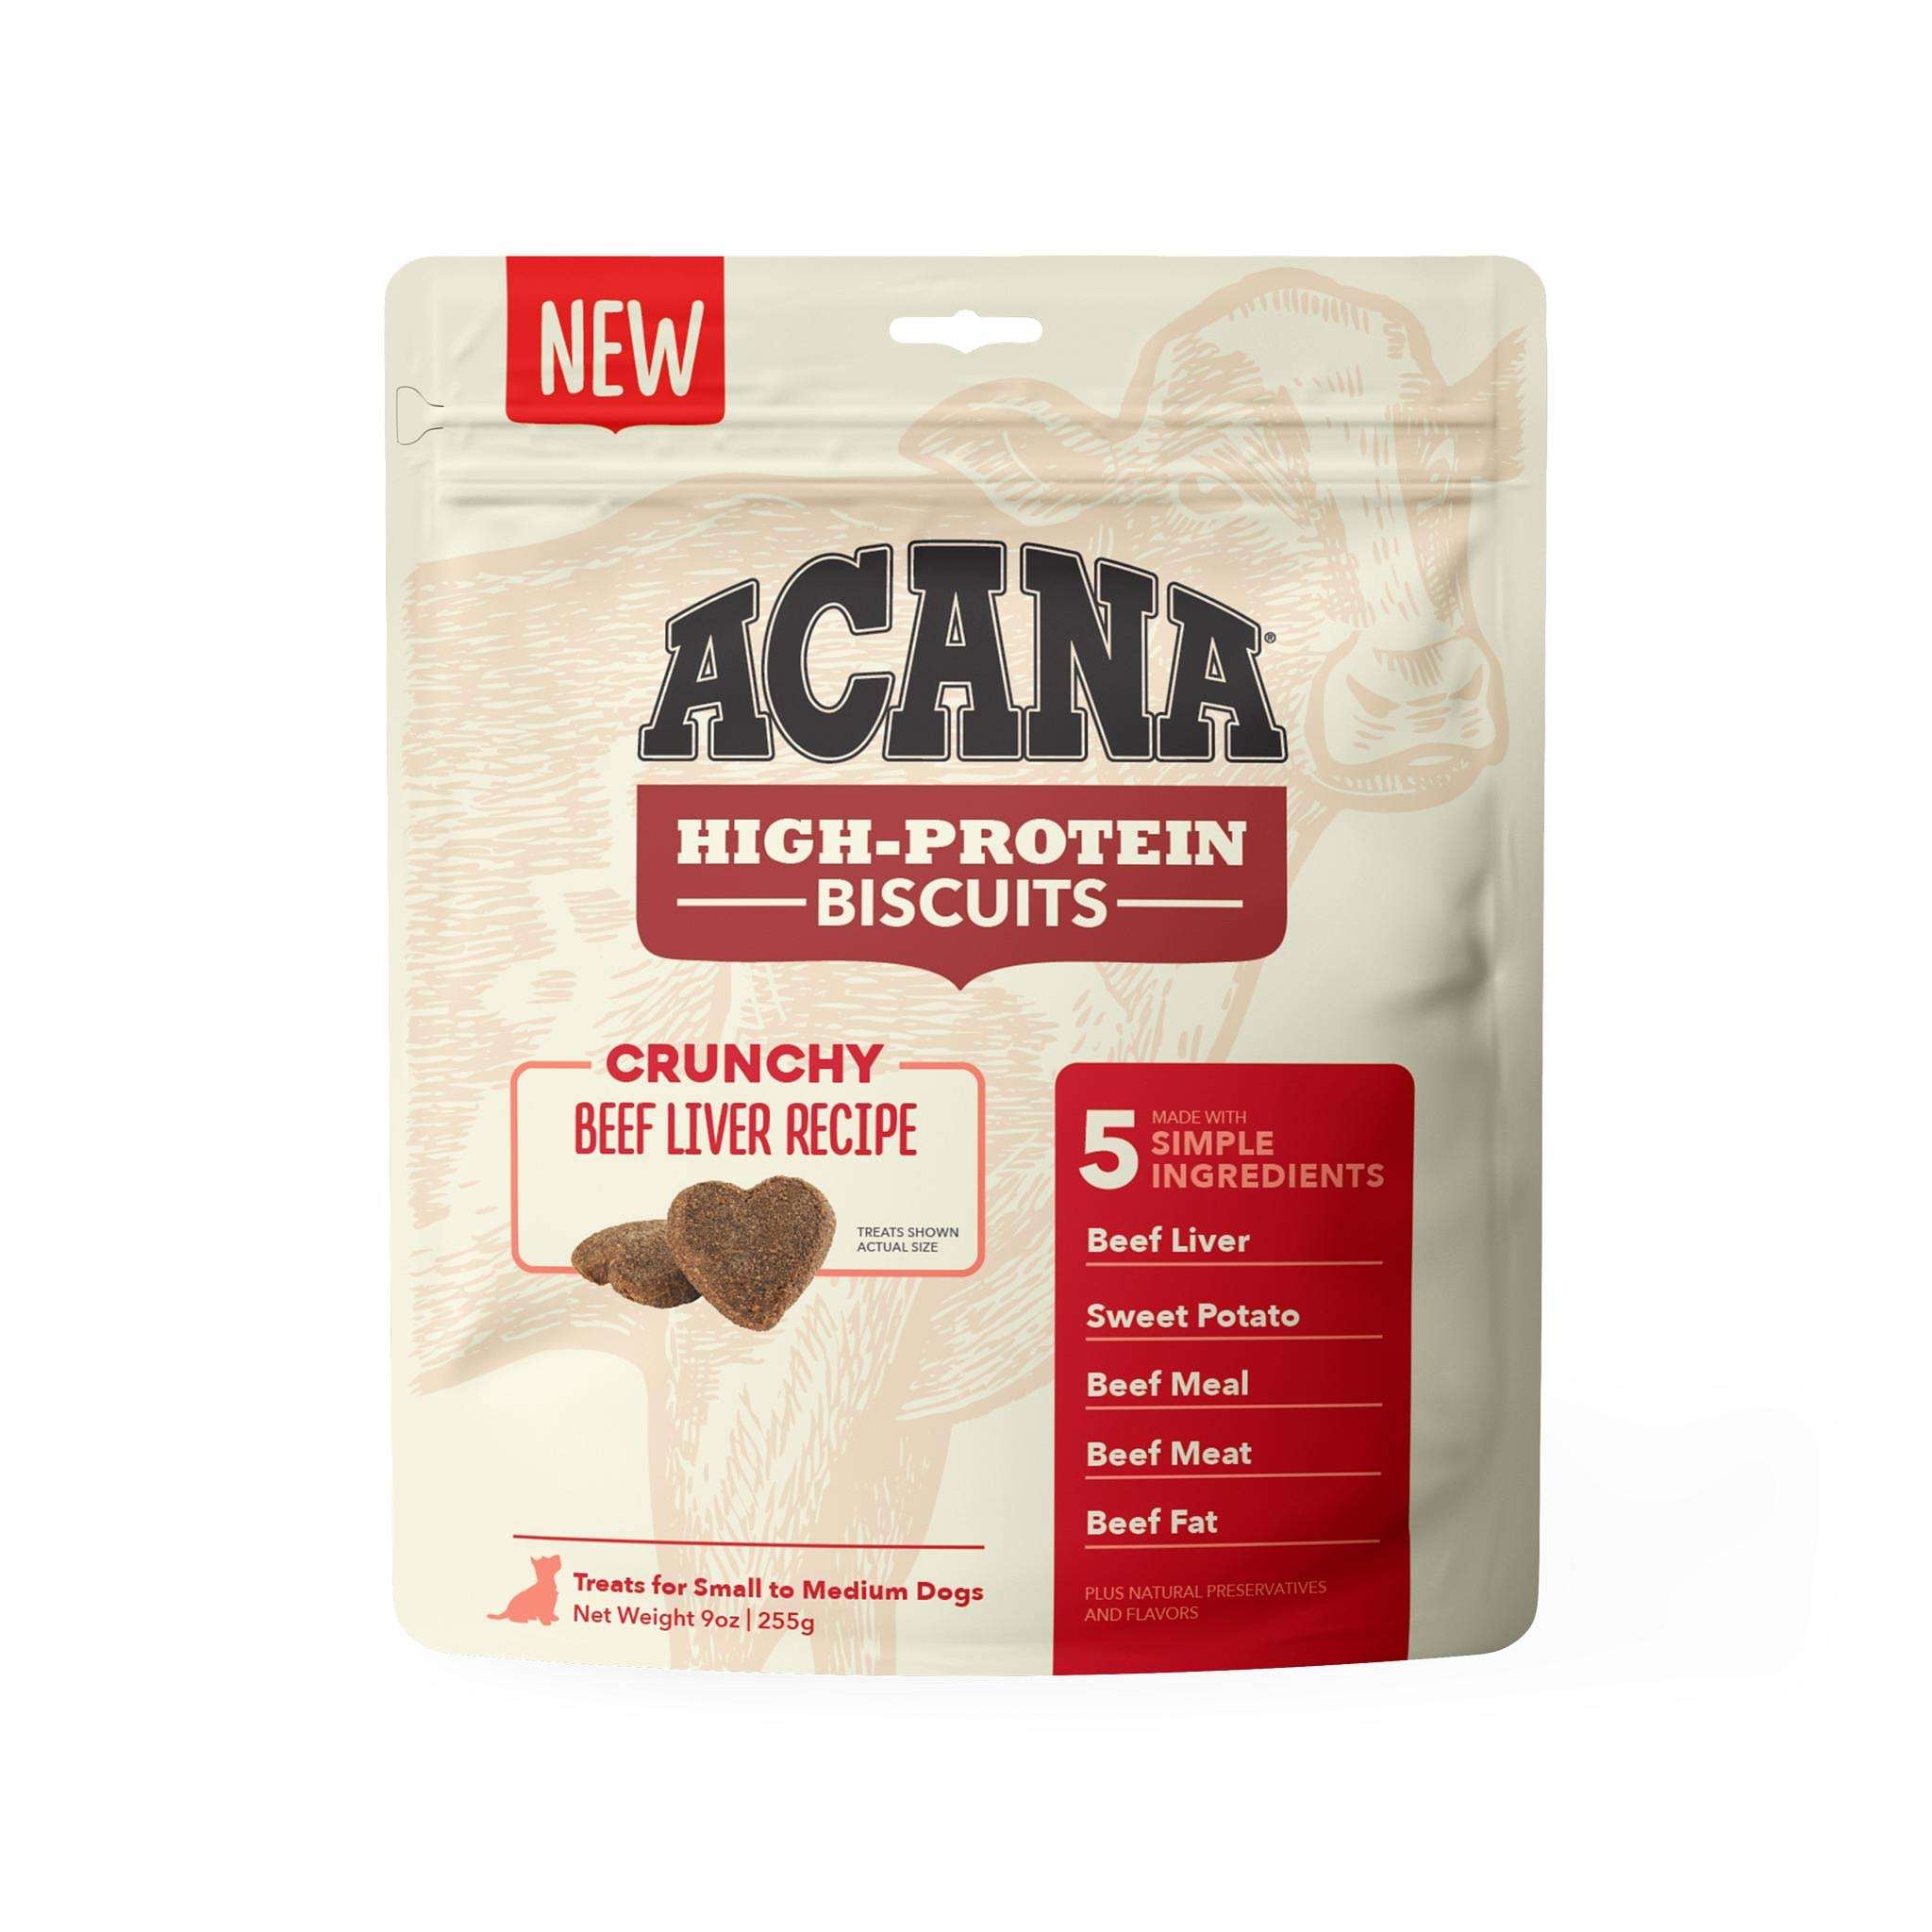 ACANA Crunchy Biscuits Beef Liver Recipe Dog Treats, Small